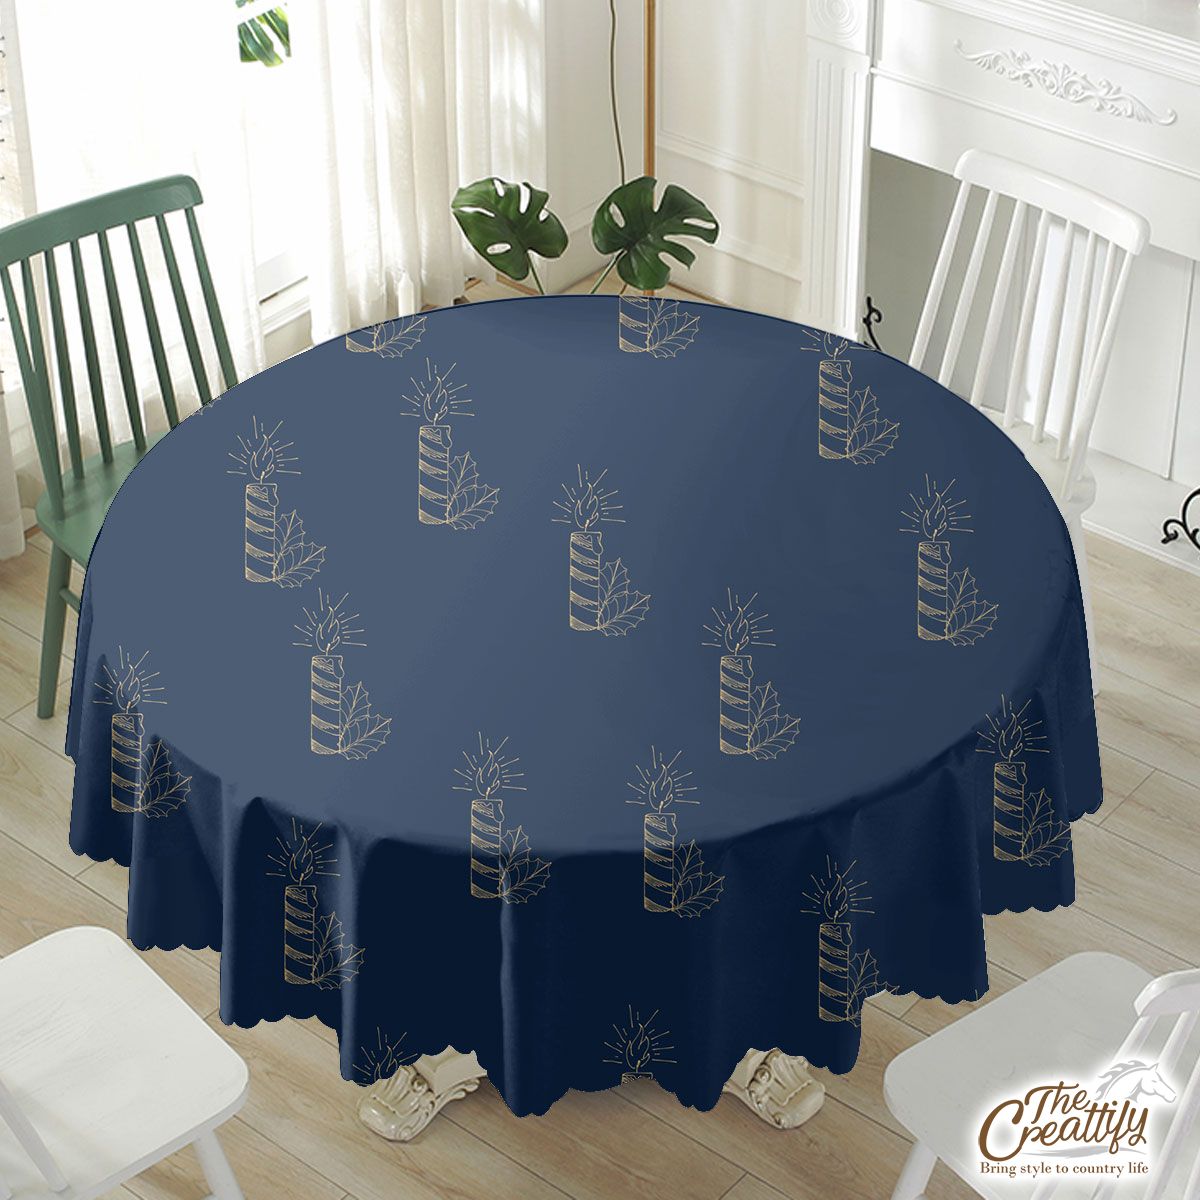 Christmas Candles With Holly Leaf Pattern Waterproof Tablecloth